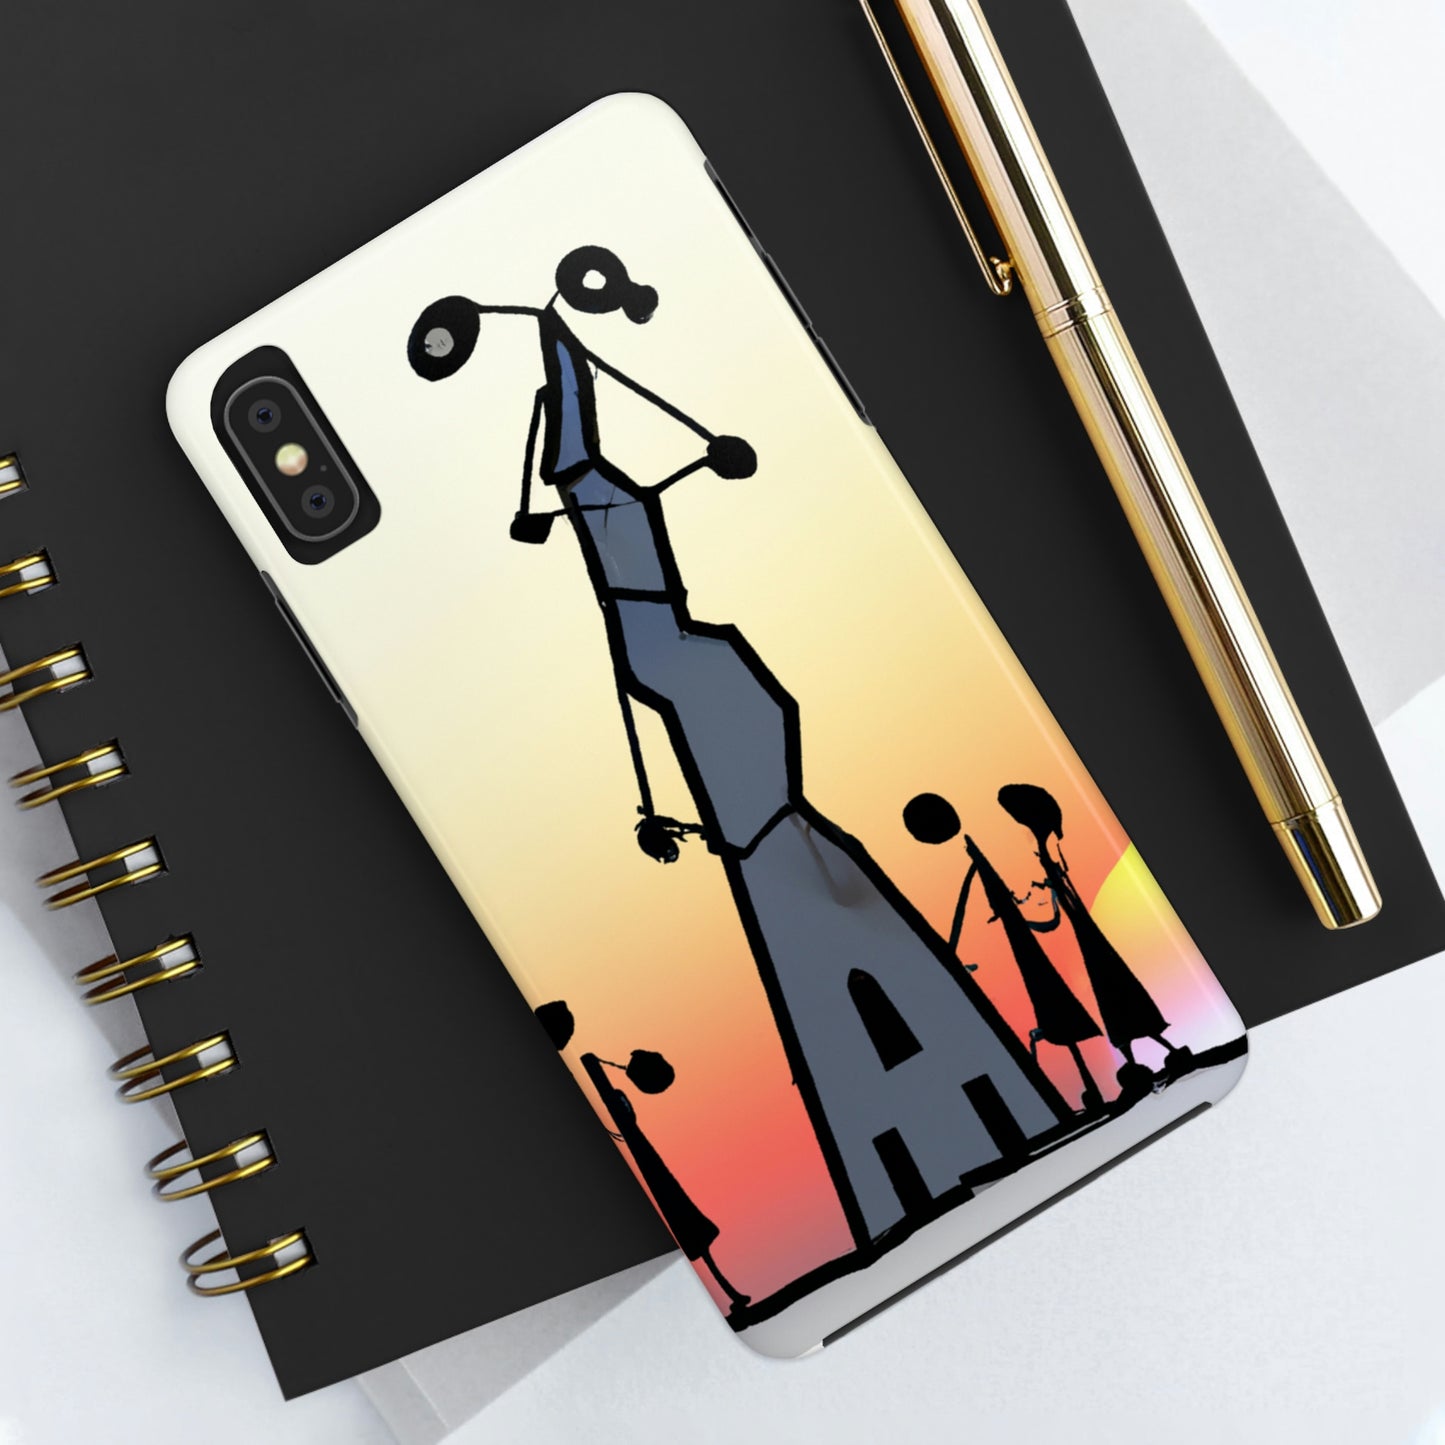 "Forgotten in the Sunset" - The Alien Tough Phone Cases